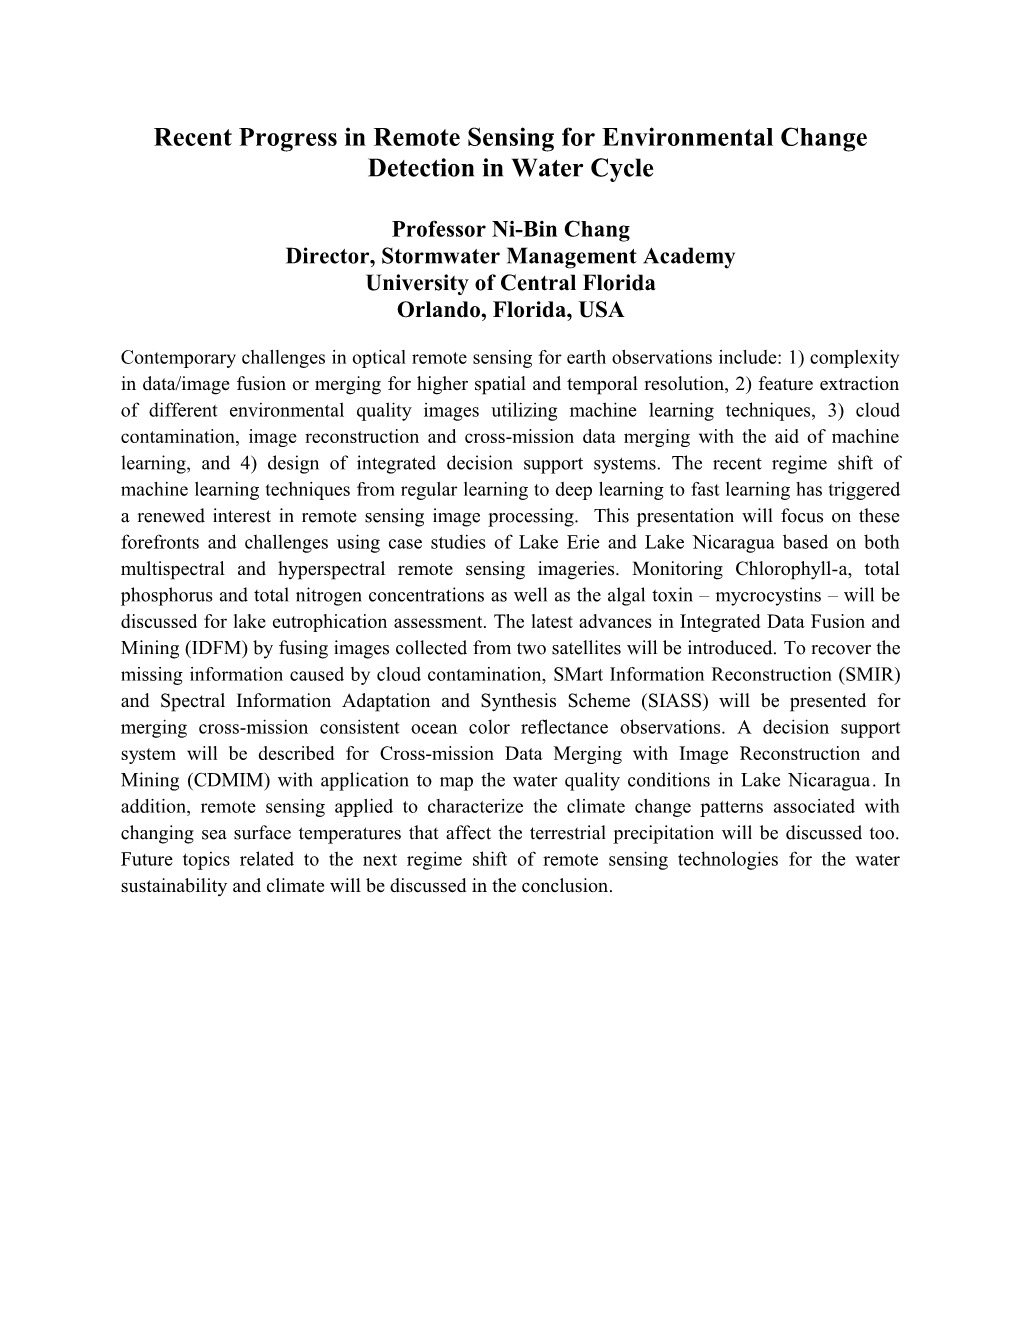 Recent Progress in Remote Sensing for Environmental Change Detection in Water Cycle